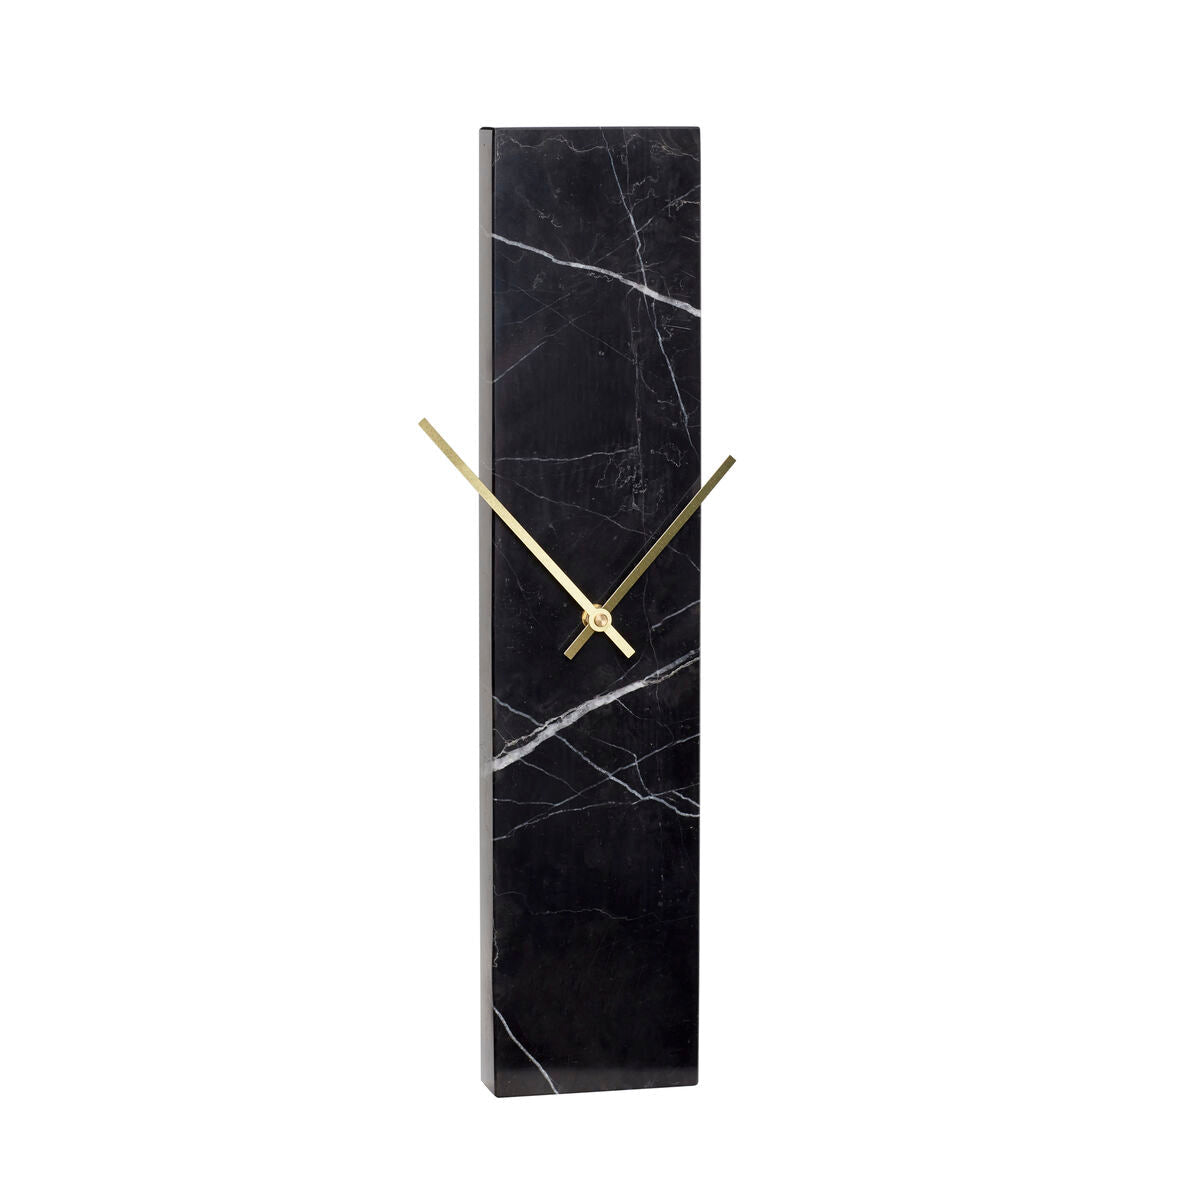 Reveal is a unique wall clock. It was made in an abstract way. Instead of a standard dial, it was focused on universal marble, which makes the whole look very elegant. And the tips go gently with him. It will be a beautiful addition to any interior in the Scandinavian and minimalist decor. Its simplicity means that it can hang in both home and commercial spaces.